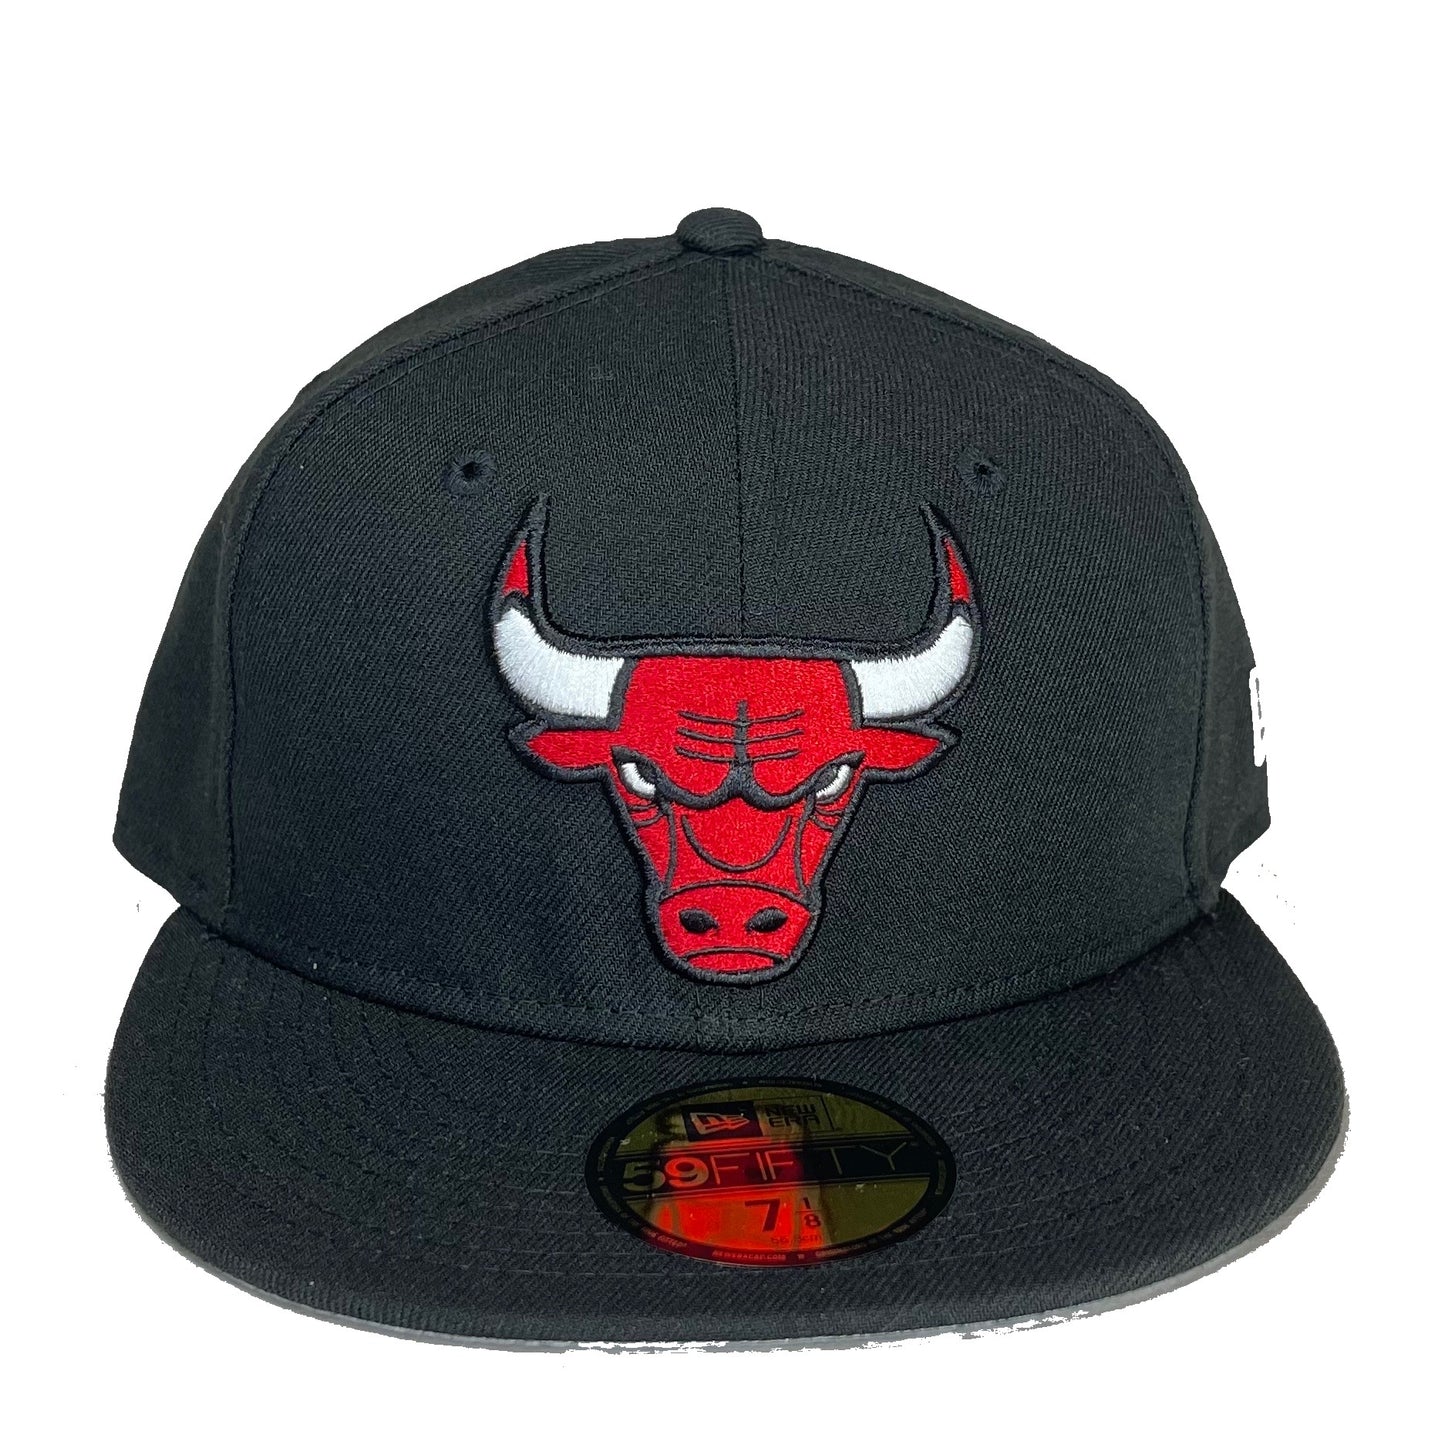 Chicago Bulls (Black) Snapback/Fitted